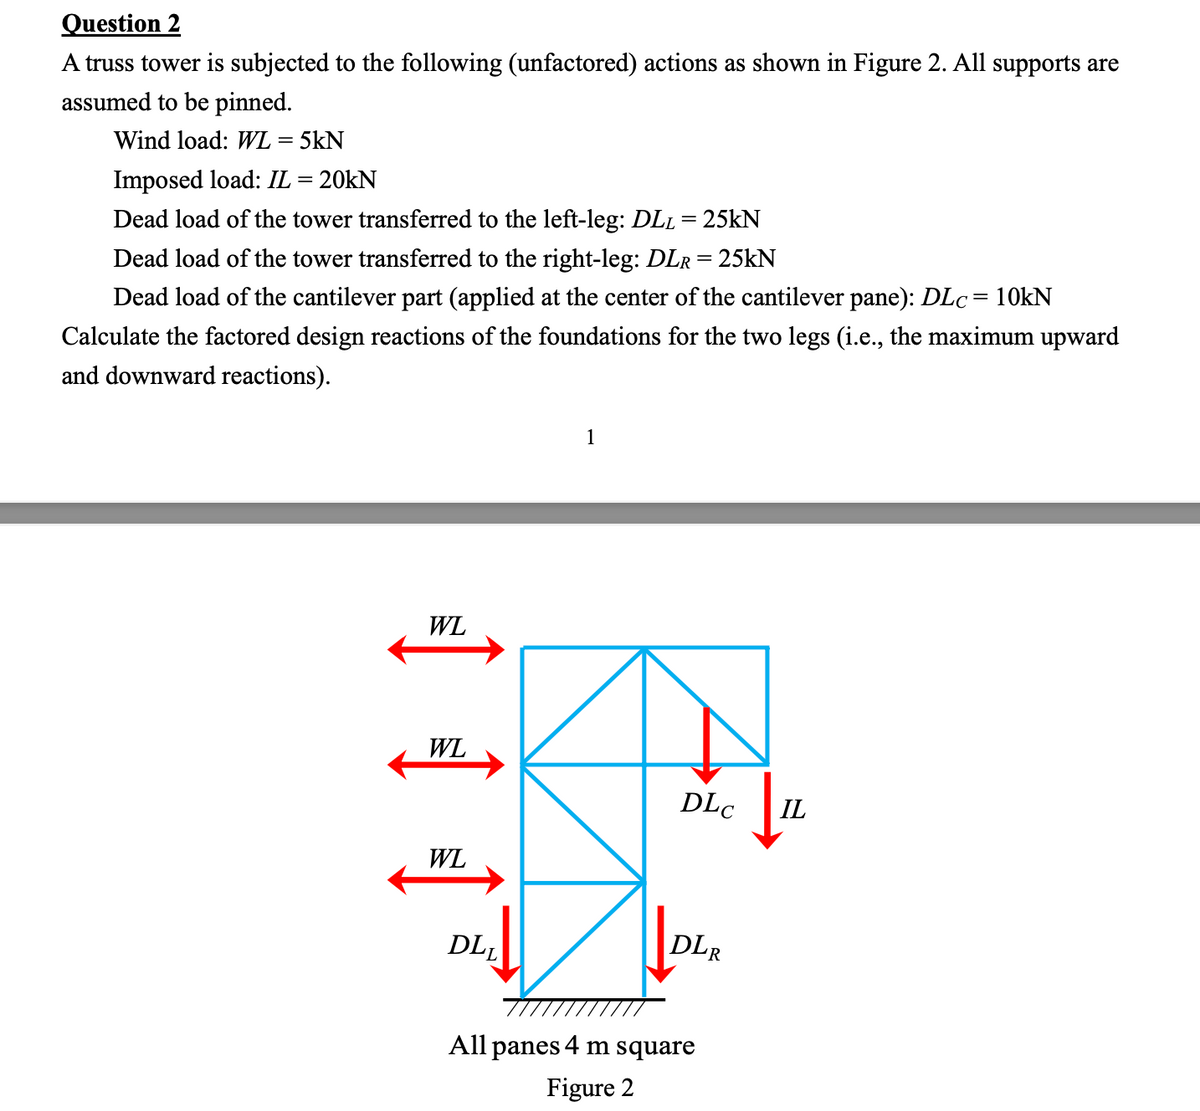 Question 2
A truss tower is subjected to the following (unfactored) actions as shown in Figure 2. All supports are
assumed to be pinned.
Wind load: WL = 5kN
Imposed load: IL = 20KN
Dead load of the tower transferred to the left-leg: DL₁ = 25kN
Dead load of the tower transferred to the right-leg: DLR = 25kN
Dead load of the cantilever part (applied at the center of the cantilever pane): DLc = 10kN
Calculate the factored design reactions of the foundations for the two legs (i.e., the maximum upward
and downward reactions).
WL
WL
WL
DLL
1
DLC
DLR
All panes 4 m square
Figure 2
↓
IL